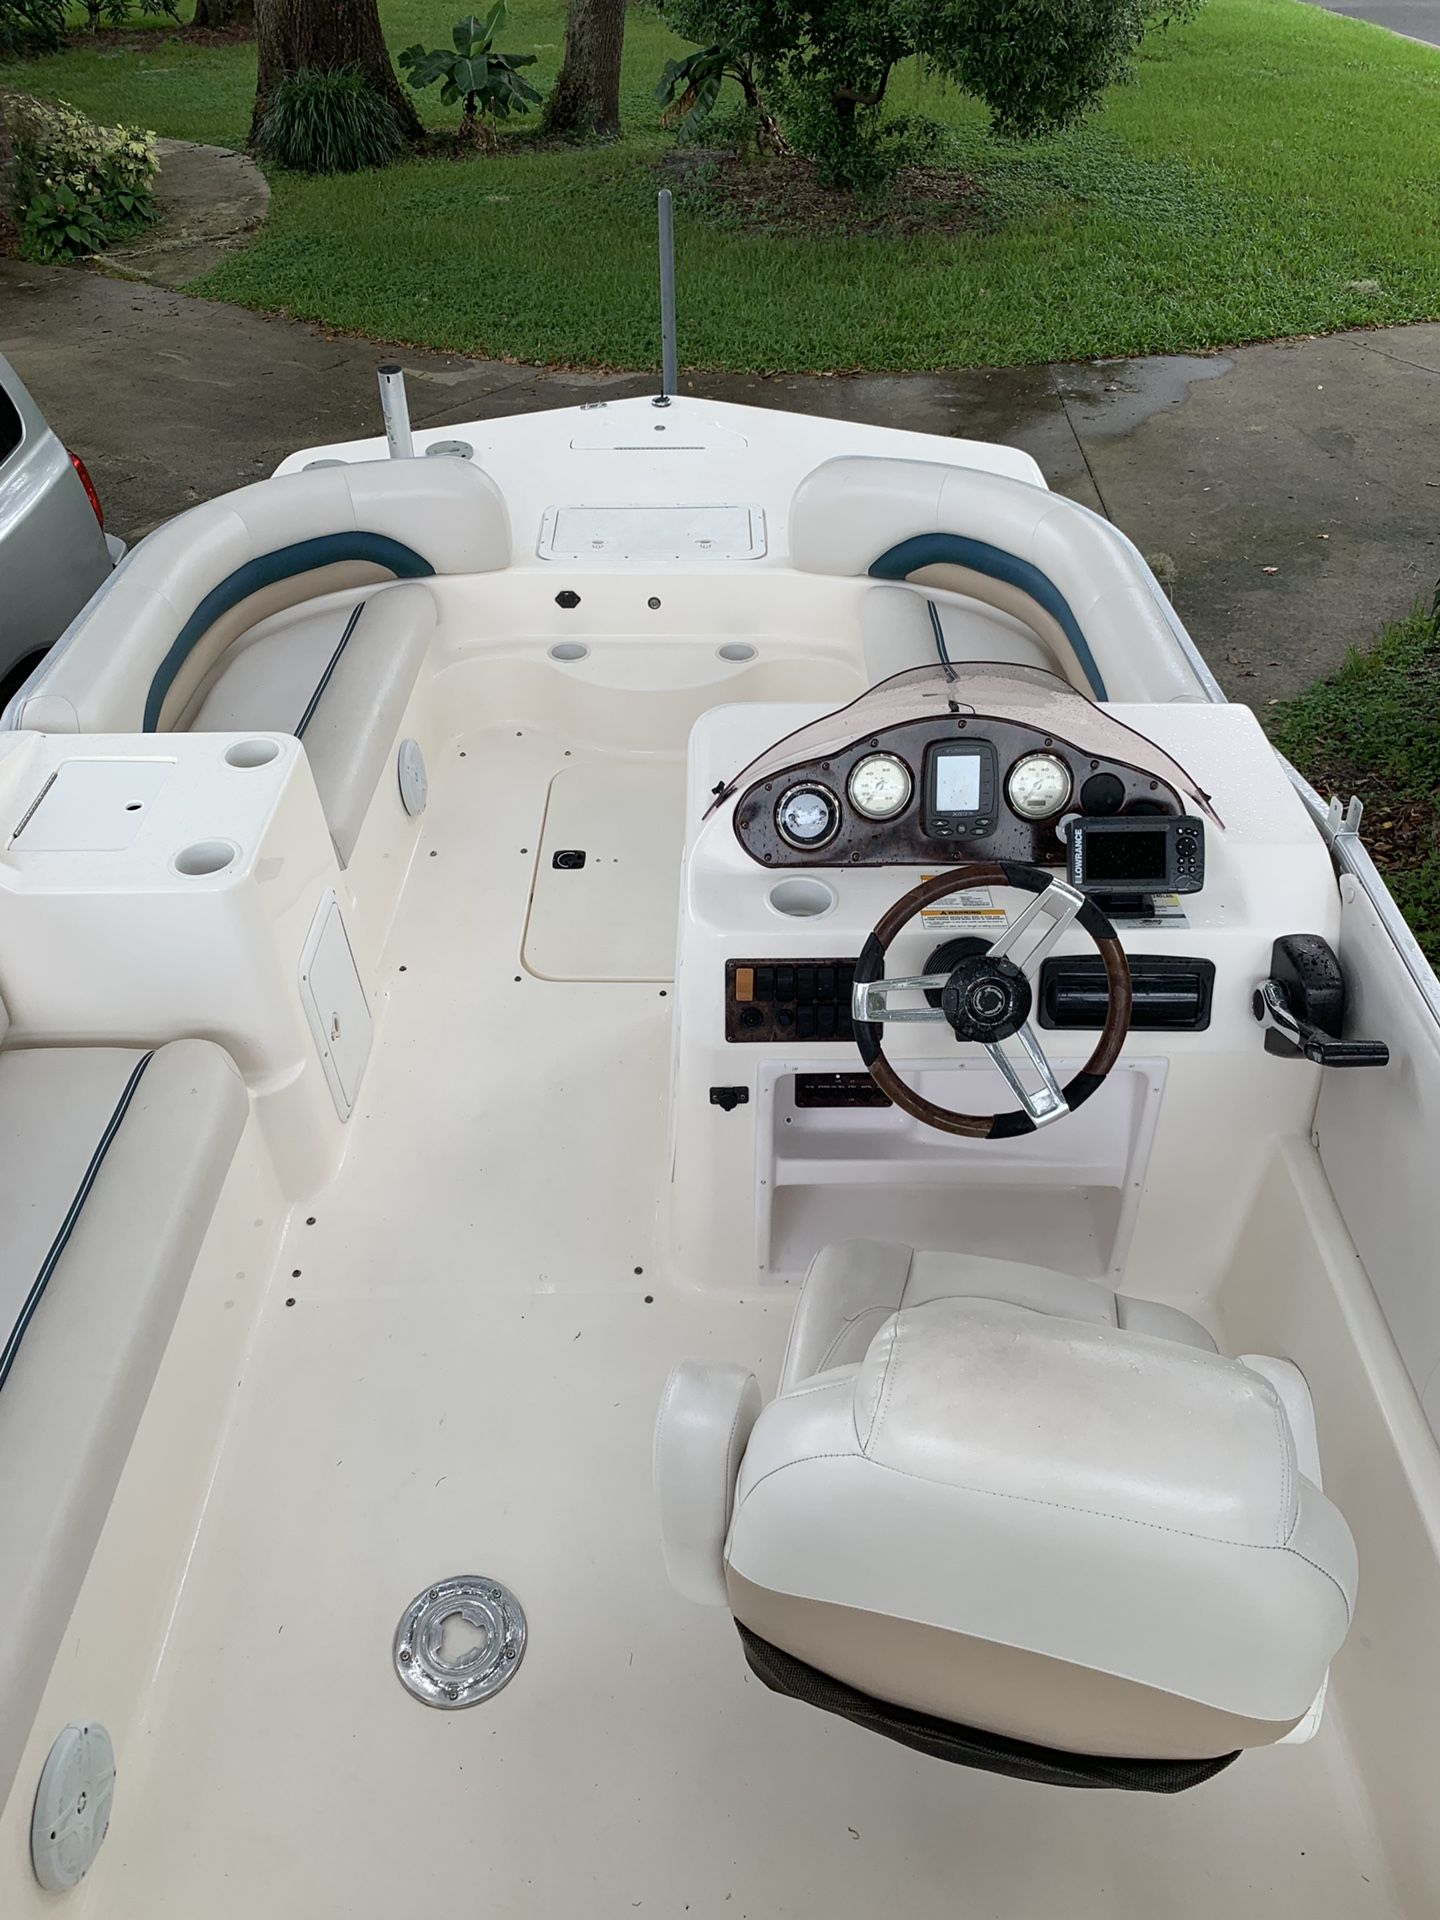 2007 Hurricane Fundeck 198REF in GREAT CONDITION